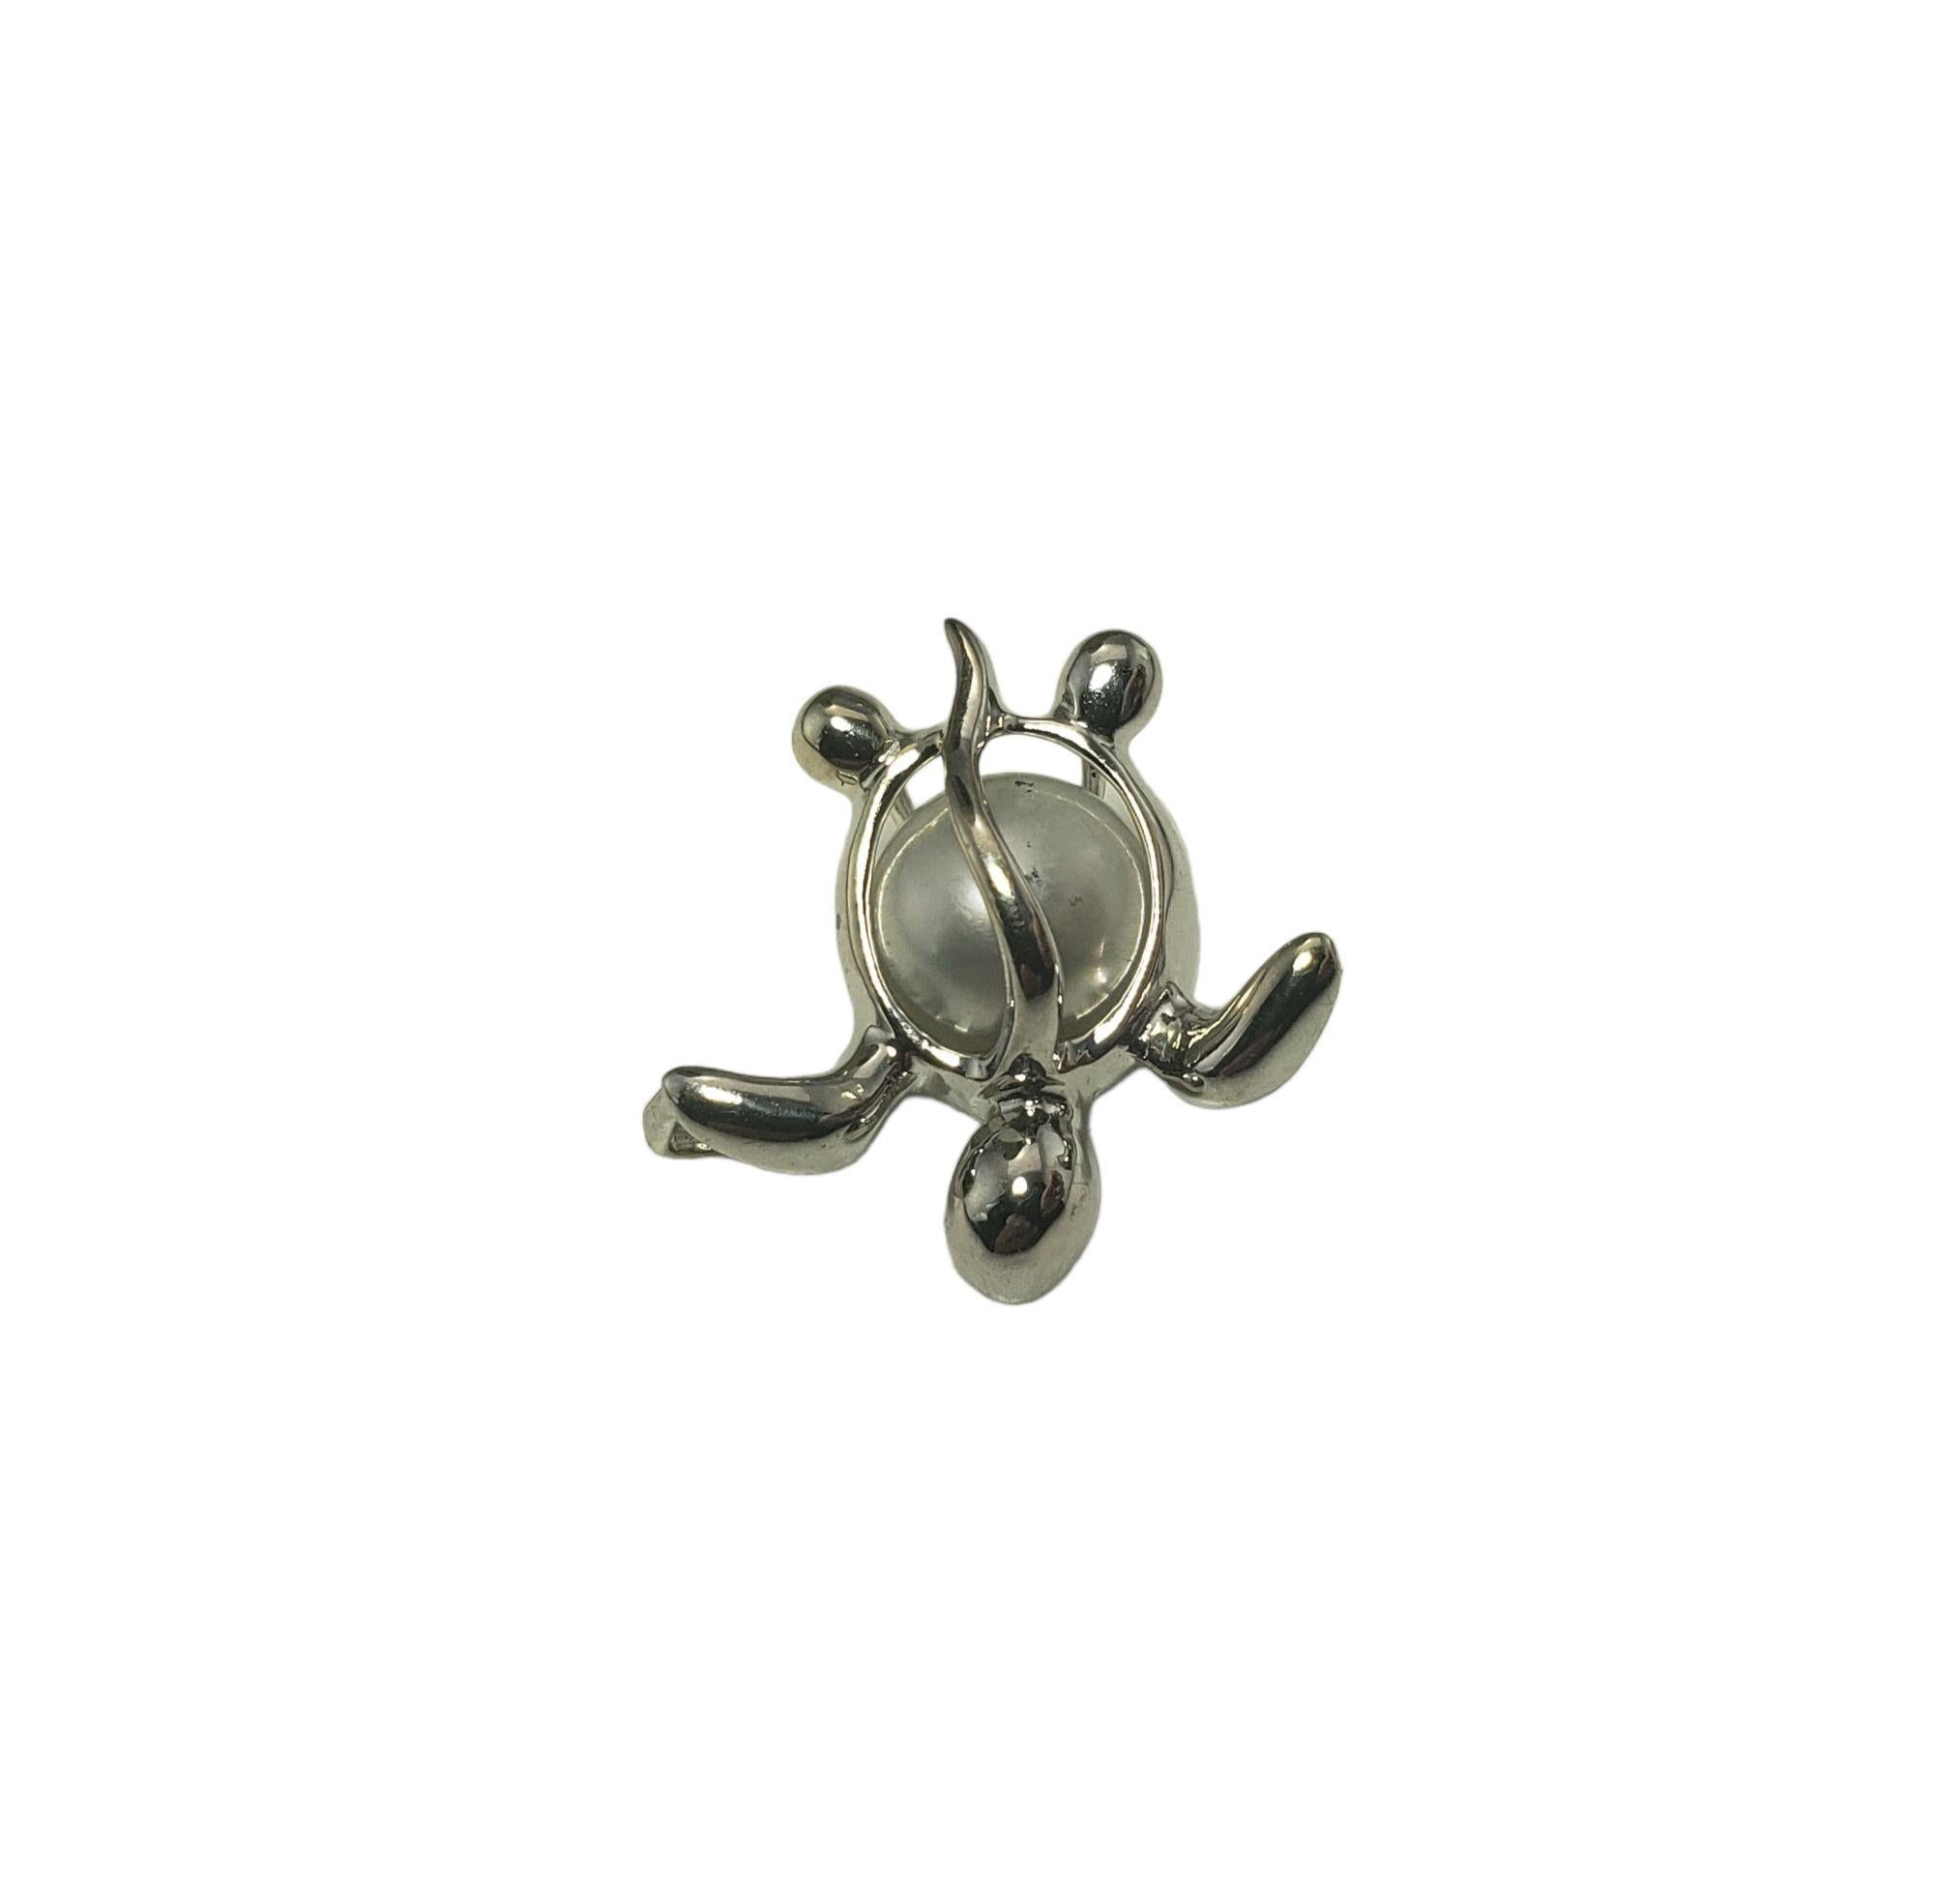 This adorable turtle charm features one 7 mm pearl set in beautifully detailed 14K white gold.

Stamped:  14K

Size:  18 mm x 18 mm

Weight: 1.4 dwt. / 2.2 gr.

Stamped: 14K

Very good condition, professionally polished.

*Chain not included.

Will